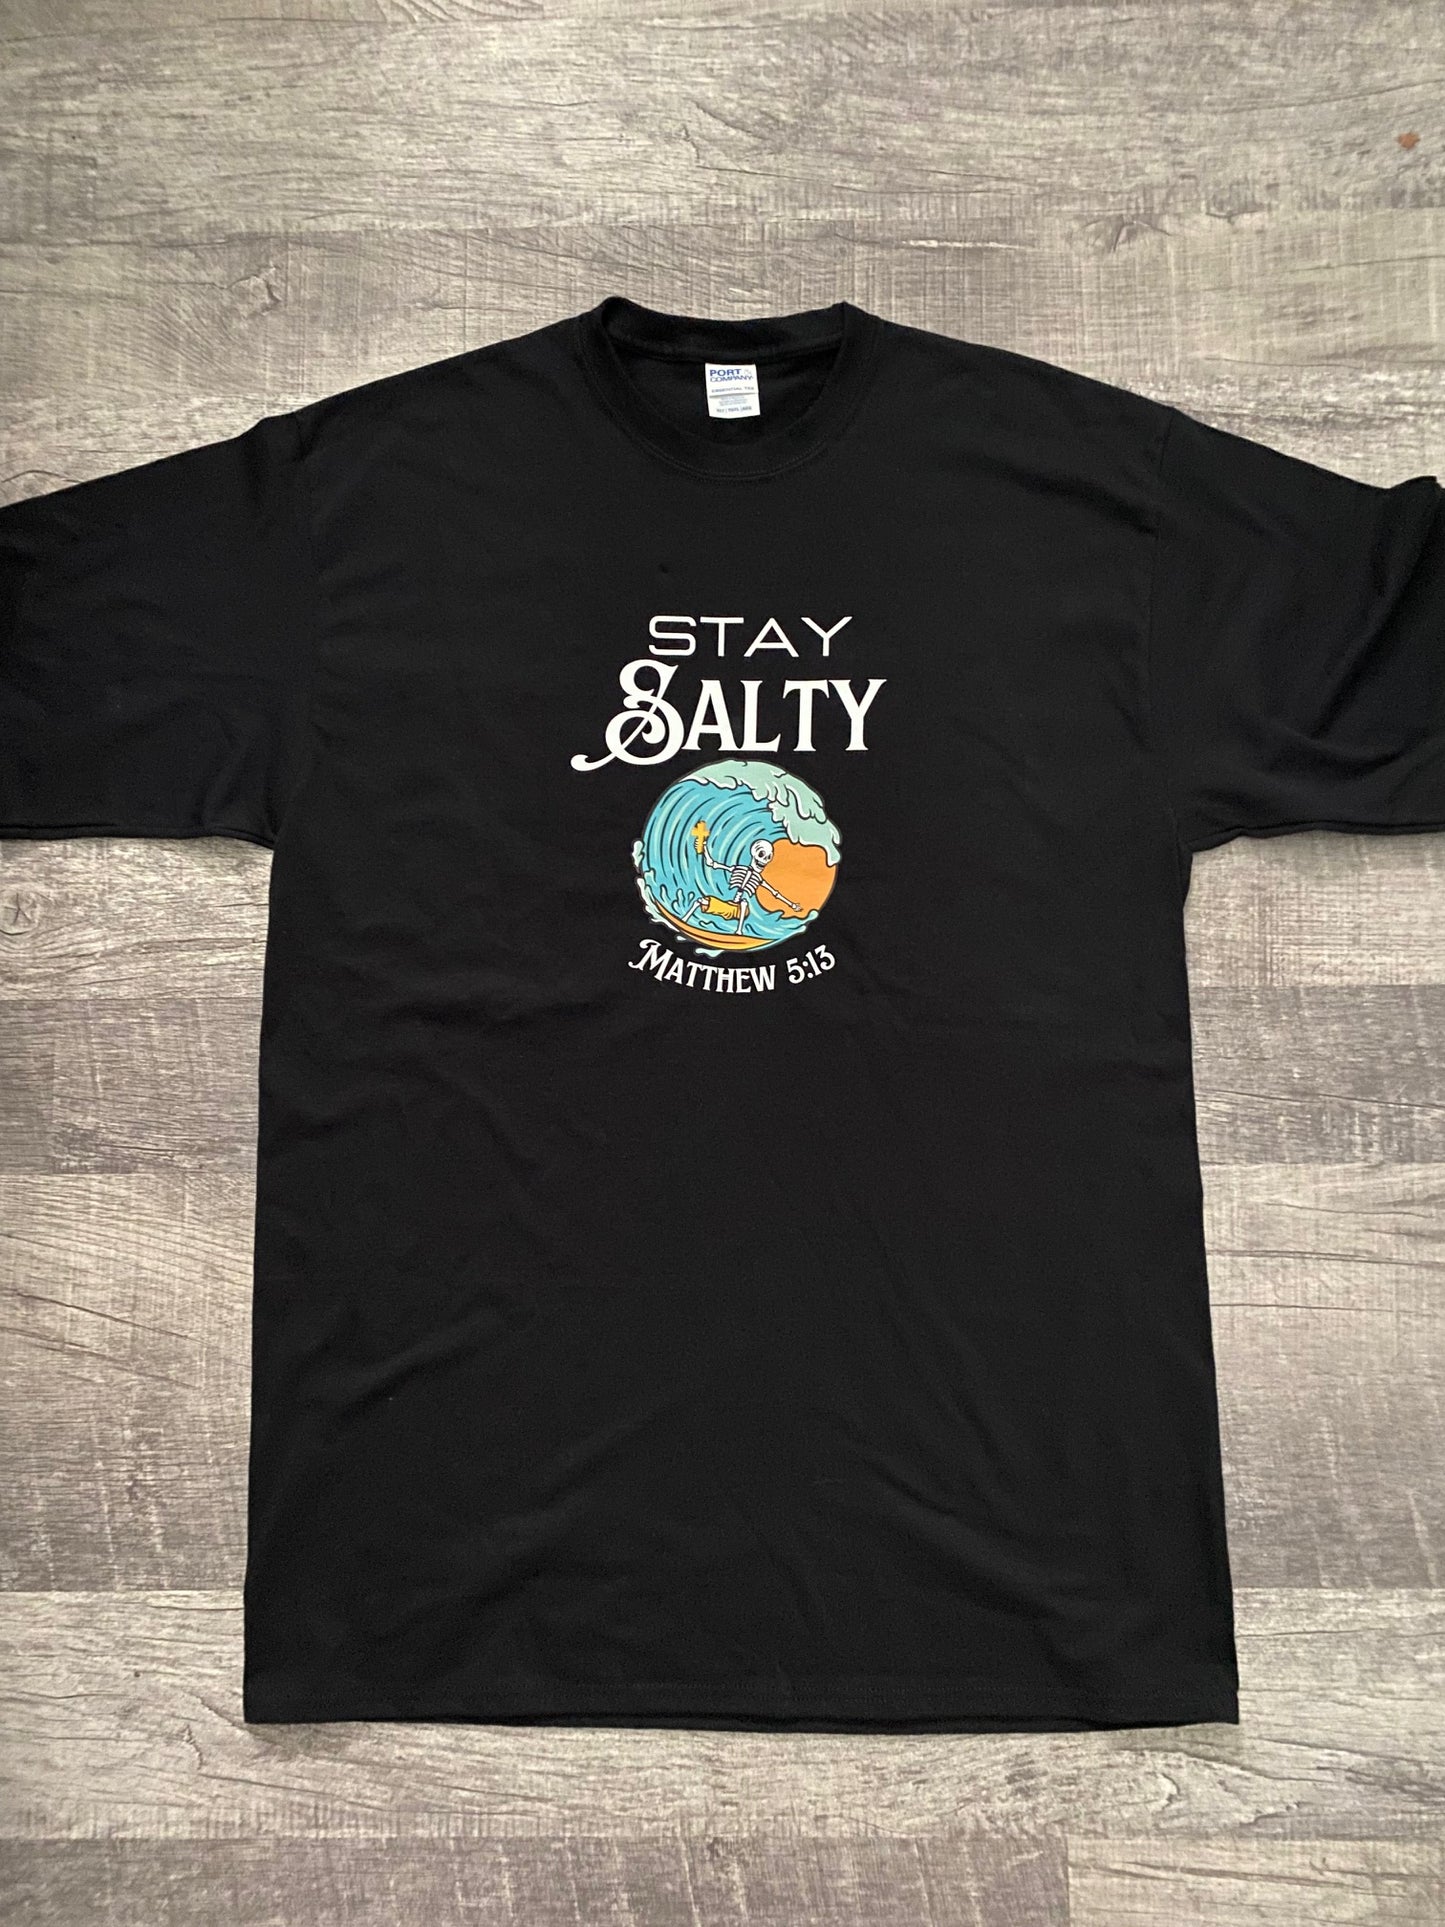 Black t-shirt with "Stay Salty" printed above a blue ocean wave with a skeleton riding the wave holding a cross in his hand. Then sun behind is orange. Underneath the wave graphic is printed "Matthew 5:13"